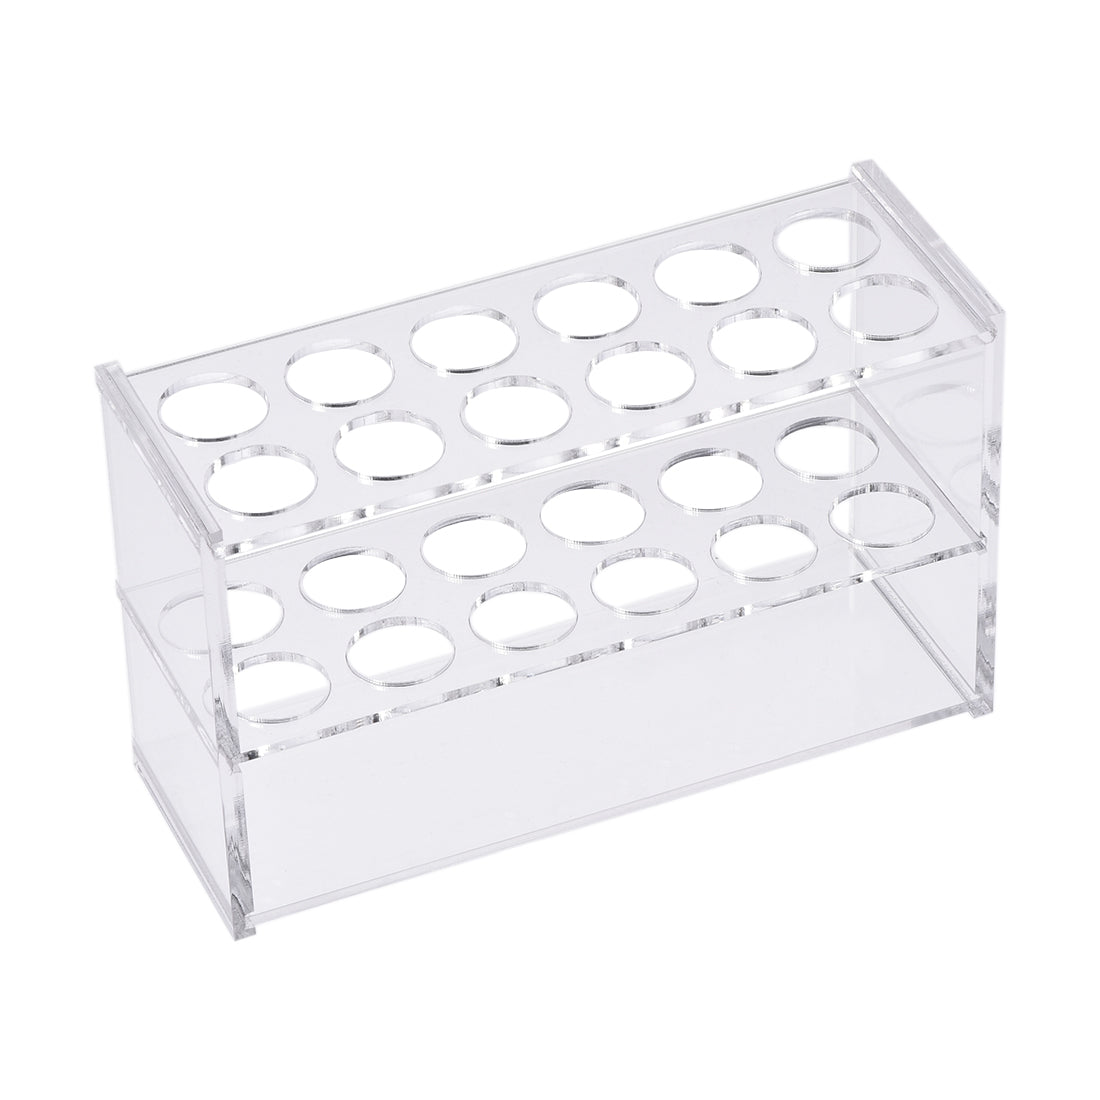 uxcell Uxcell Acrylic Test Tube Holder Rack 2x6 Wells for 25ml Centrifuge Tubes Clear